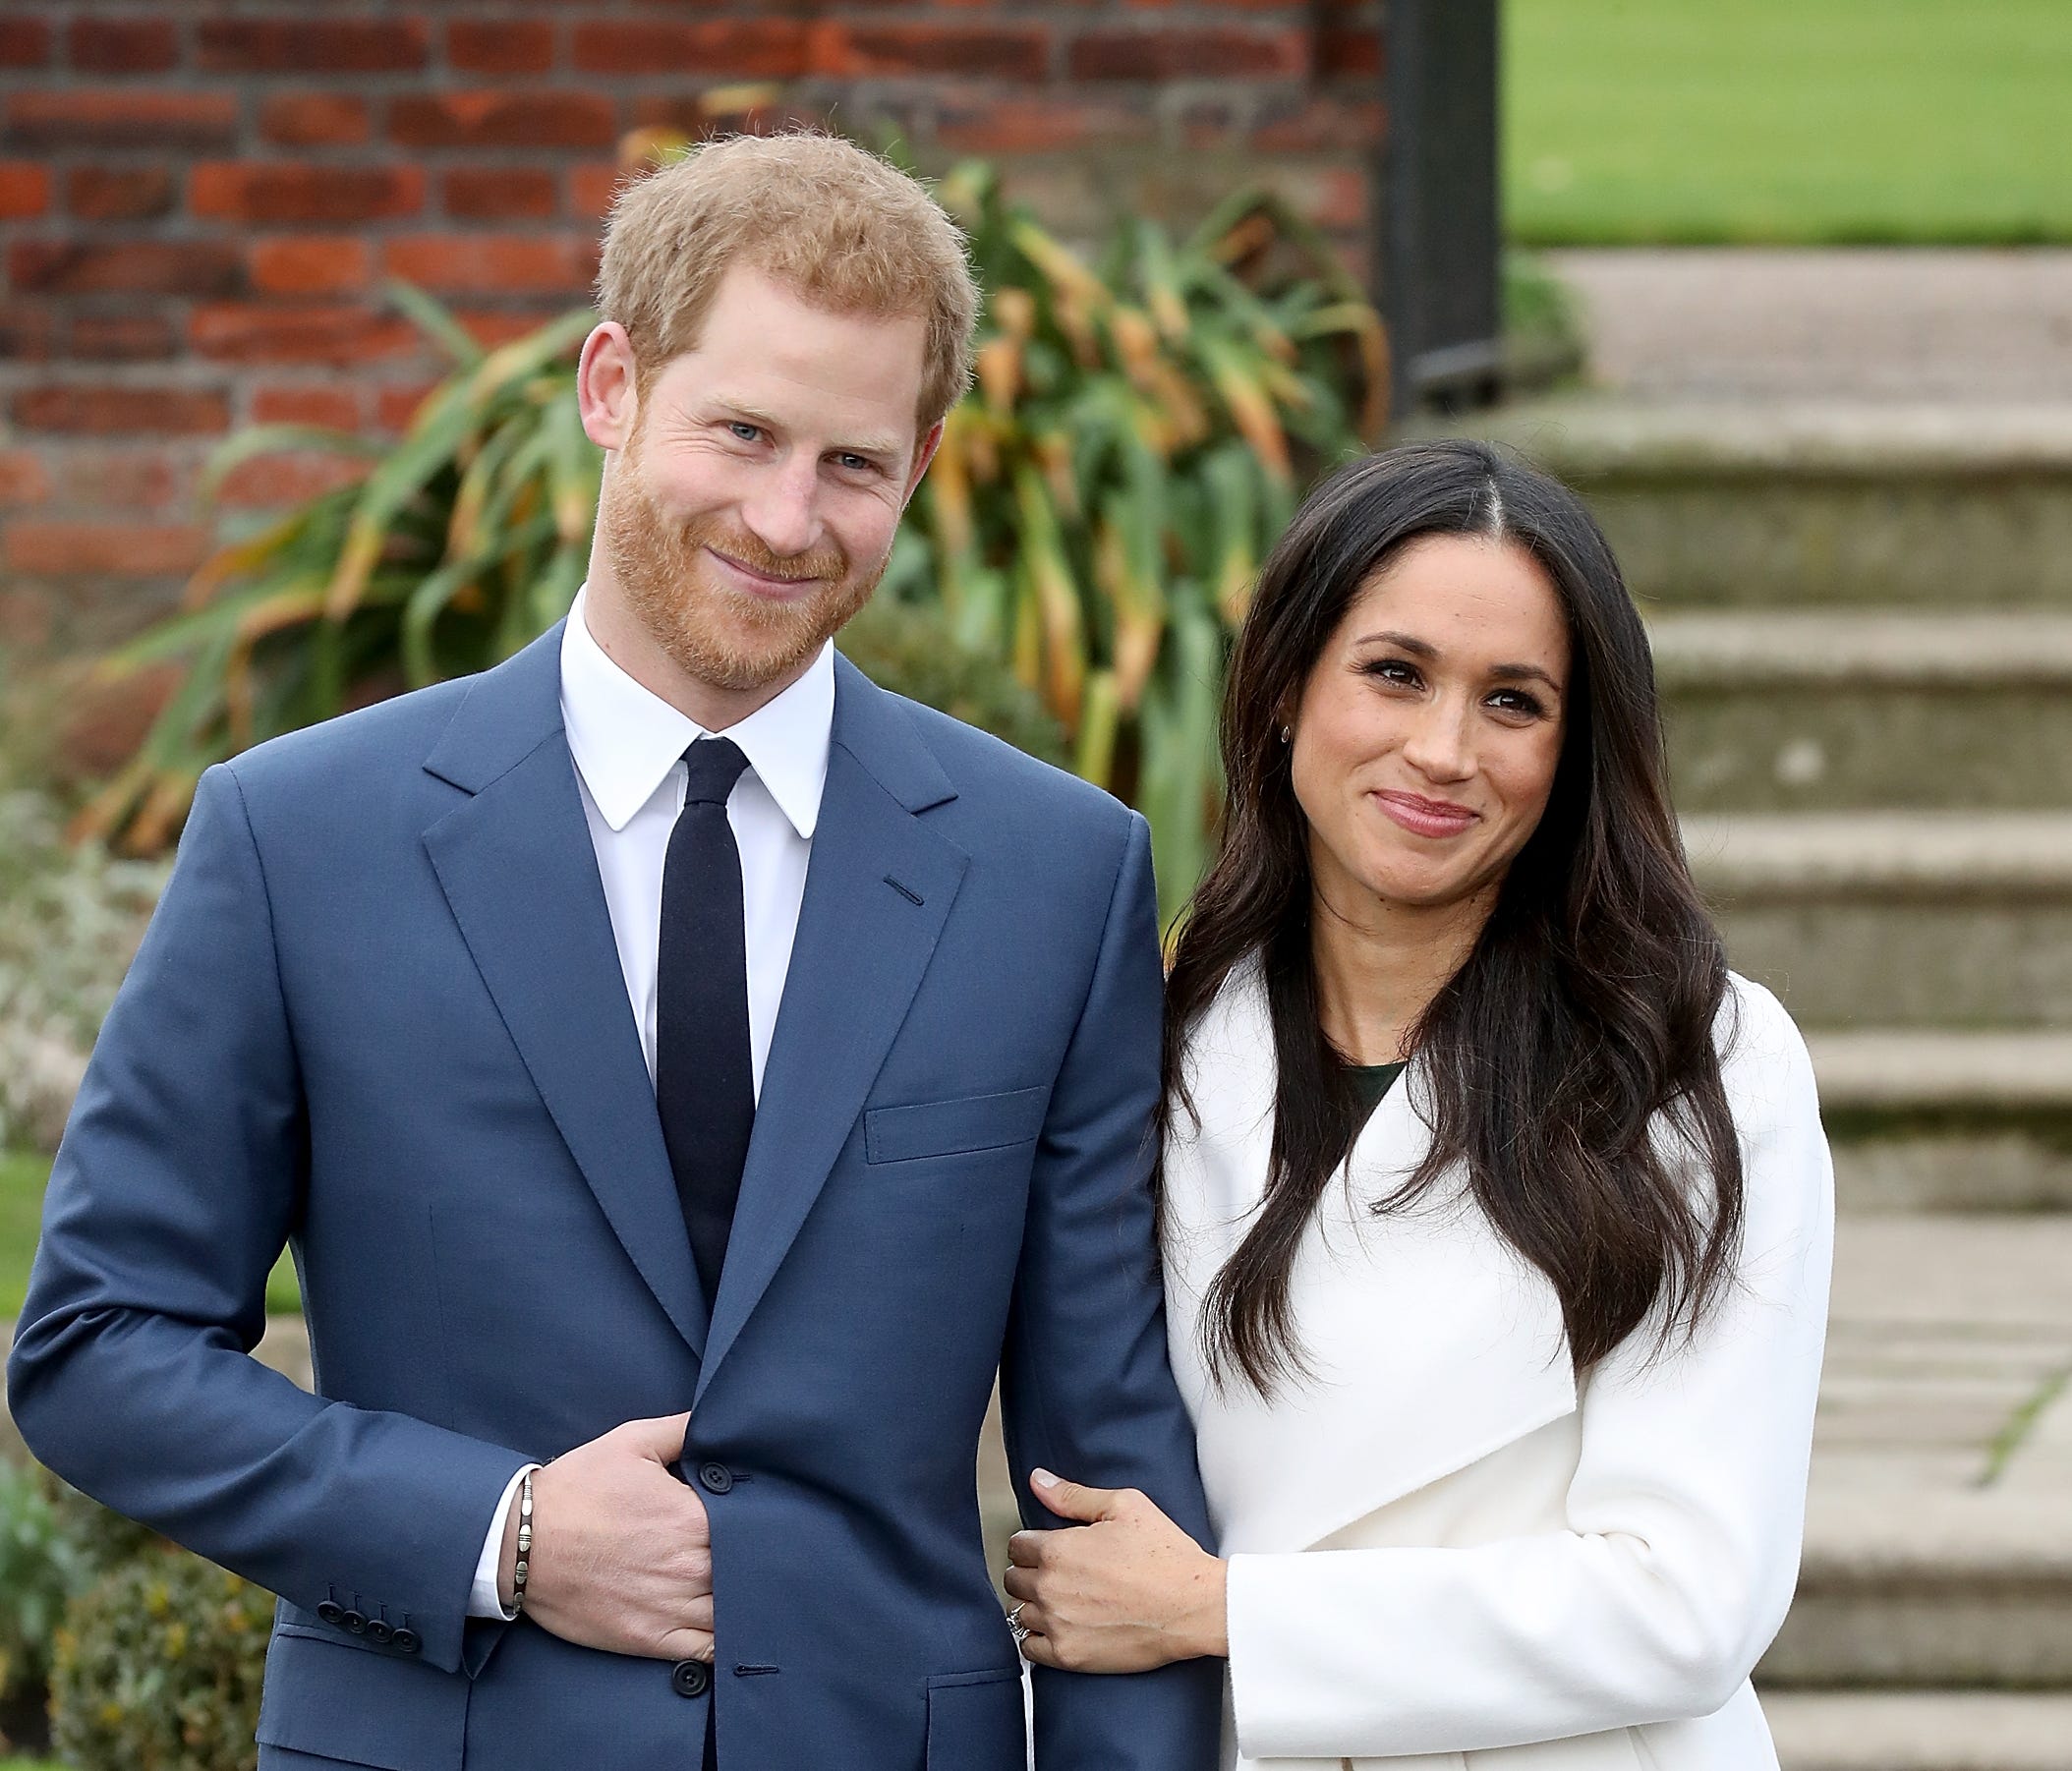 The royal and the American-born actress have been dating since November 2016. They went public as a couple at Prince Harry's Invictus Games in September of this year.